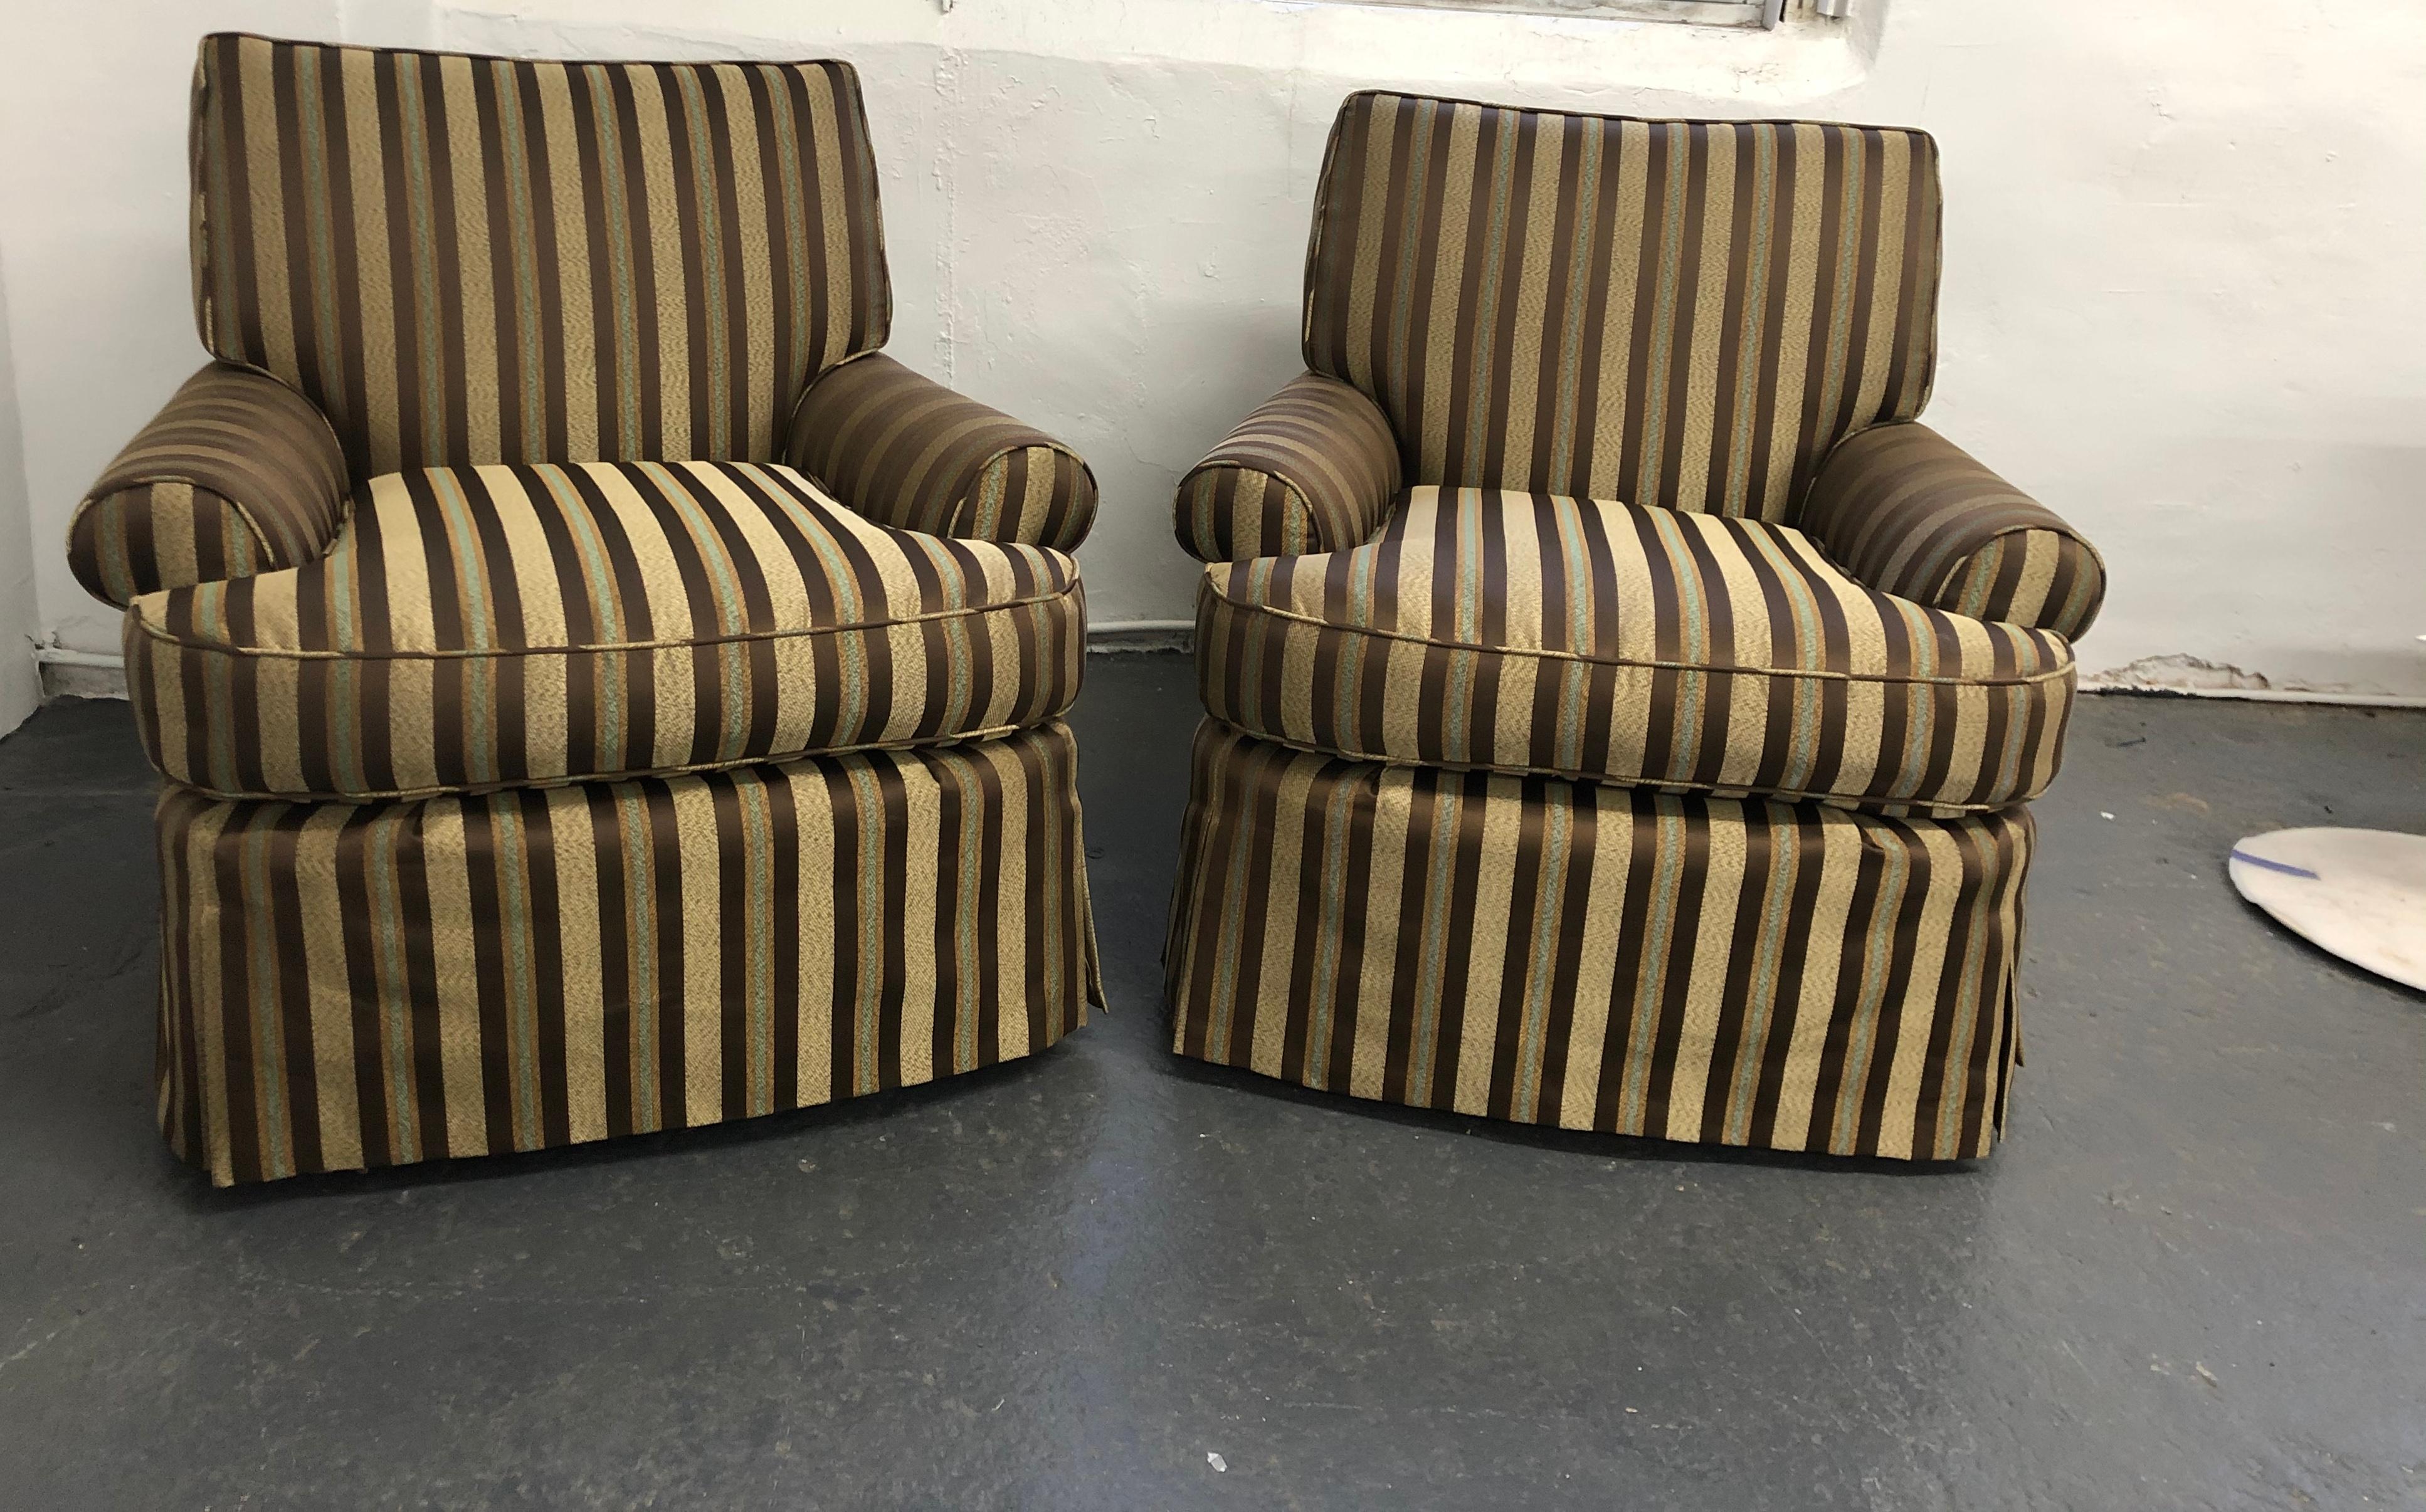 The pair was purchased from an estate, were recently refurbished and are very comfortable. The frames are solid with 8-way hand ‘tied coil spring construction. The seat cushions are down/wrapped foam core. The chairs have waterfall pleated skirts